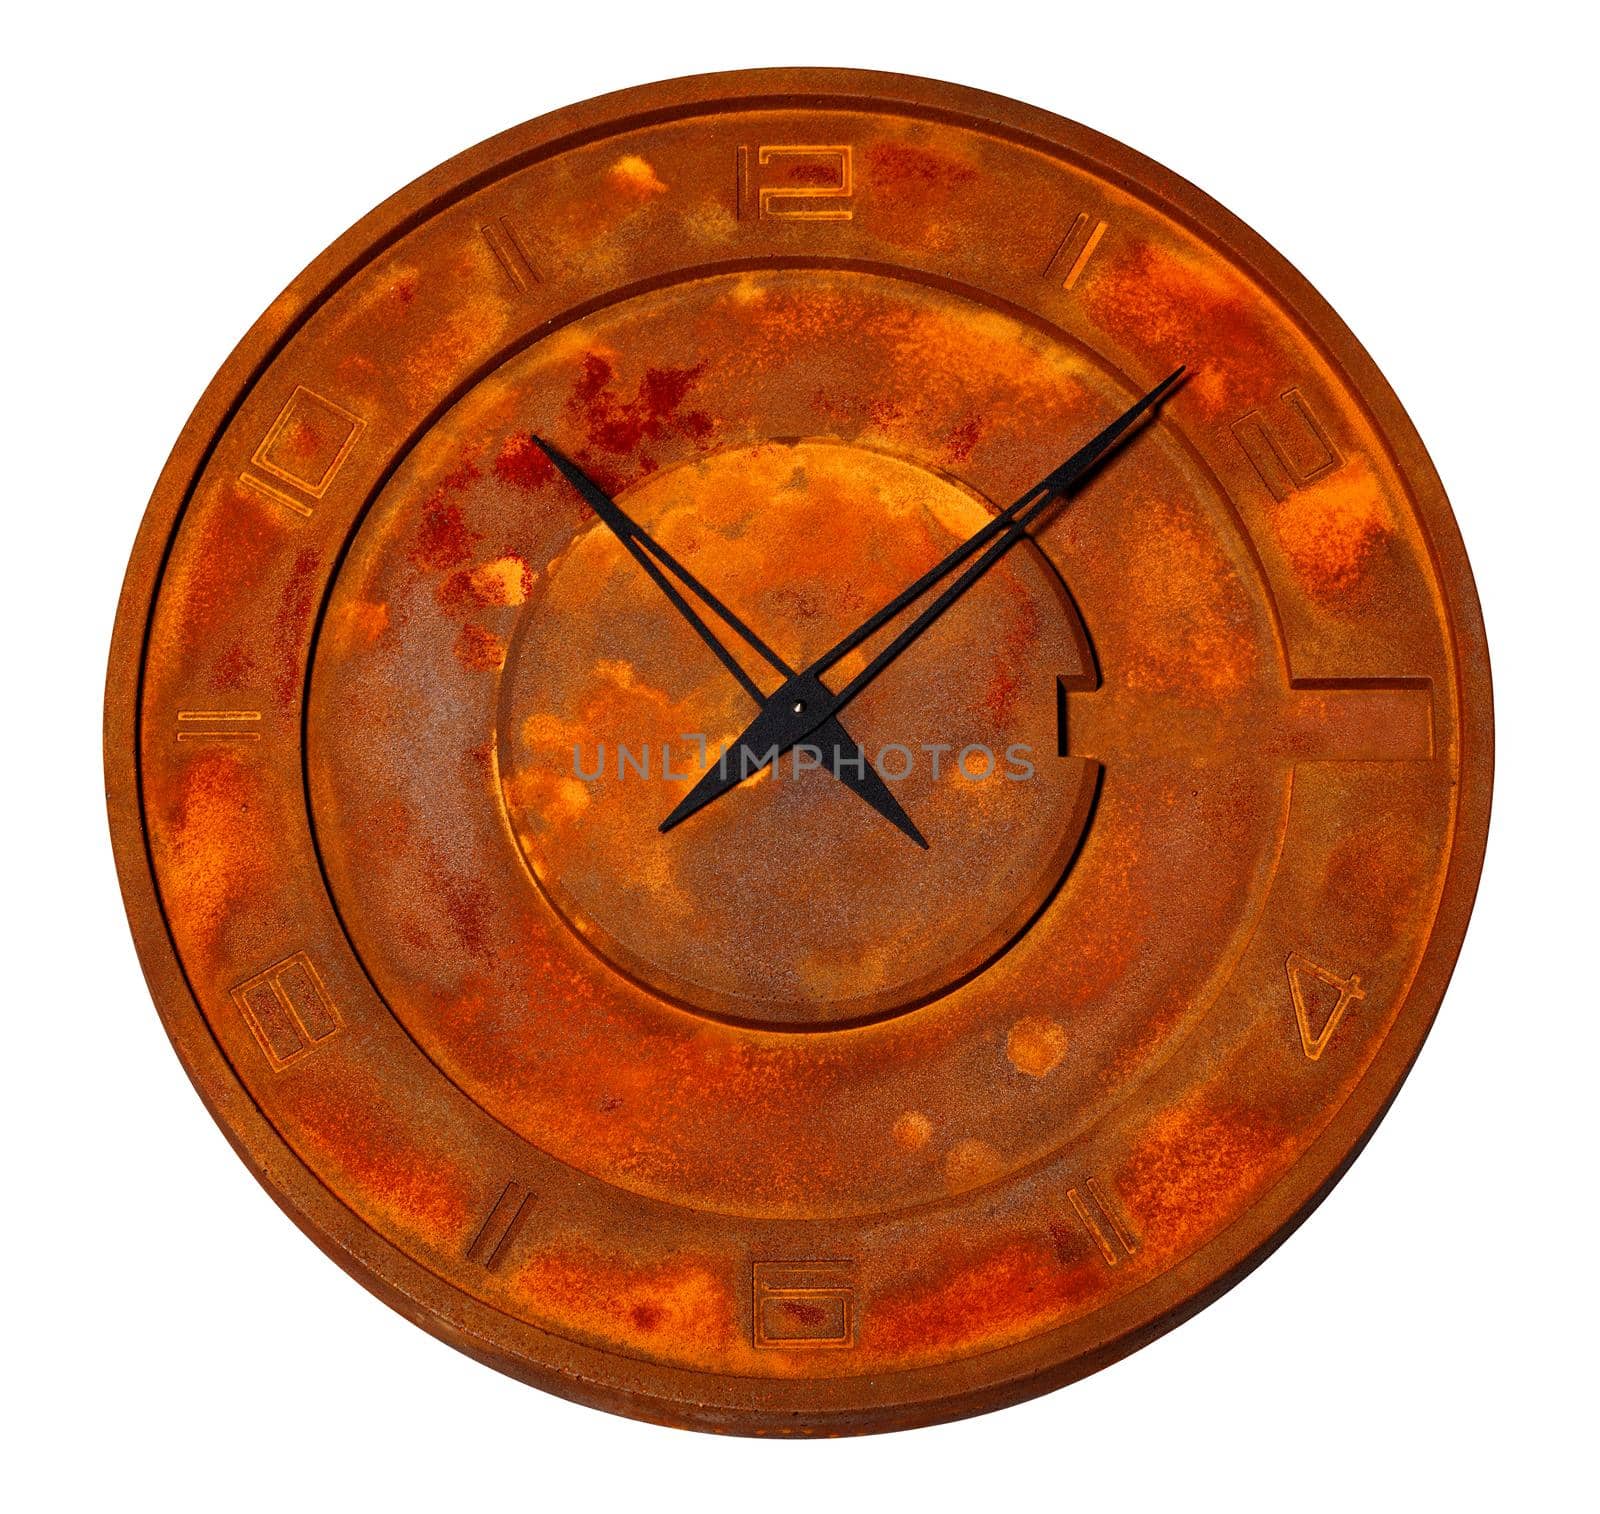 Round industrial wall clock in iron, rust all over the dial, isolated on white background.